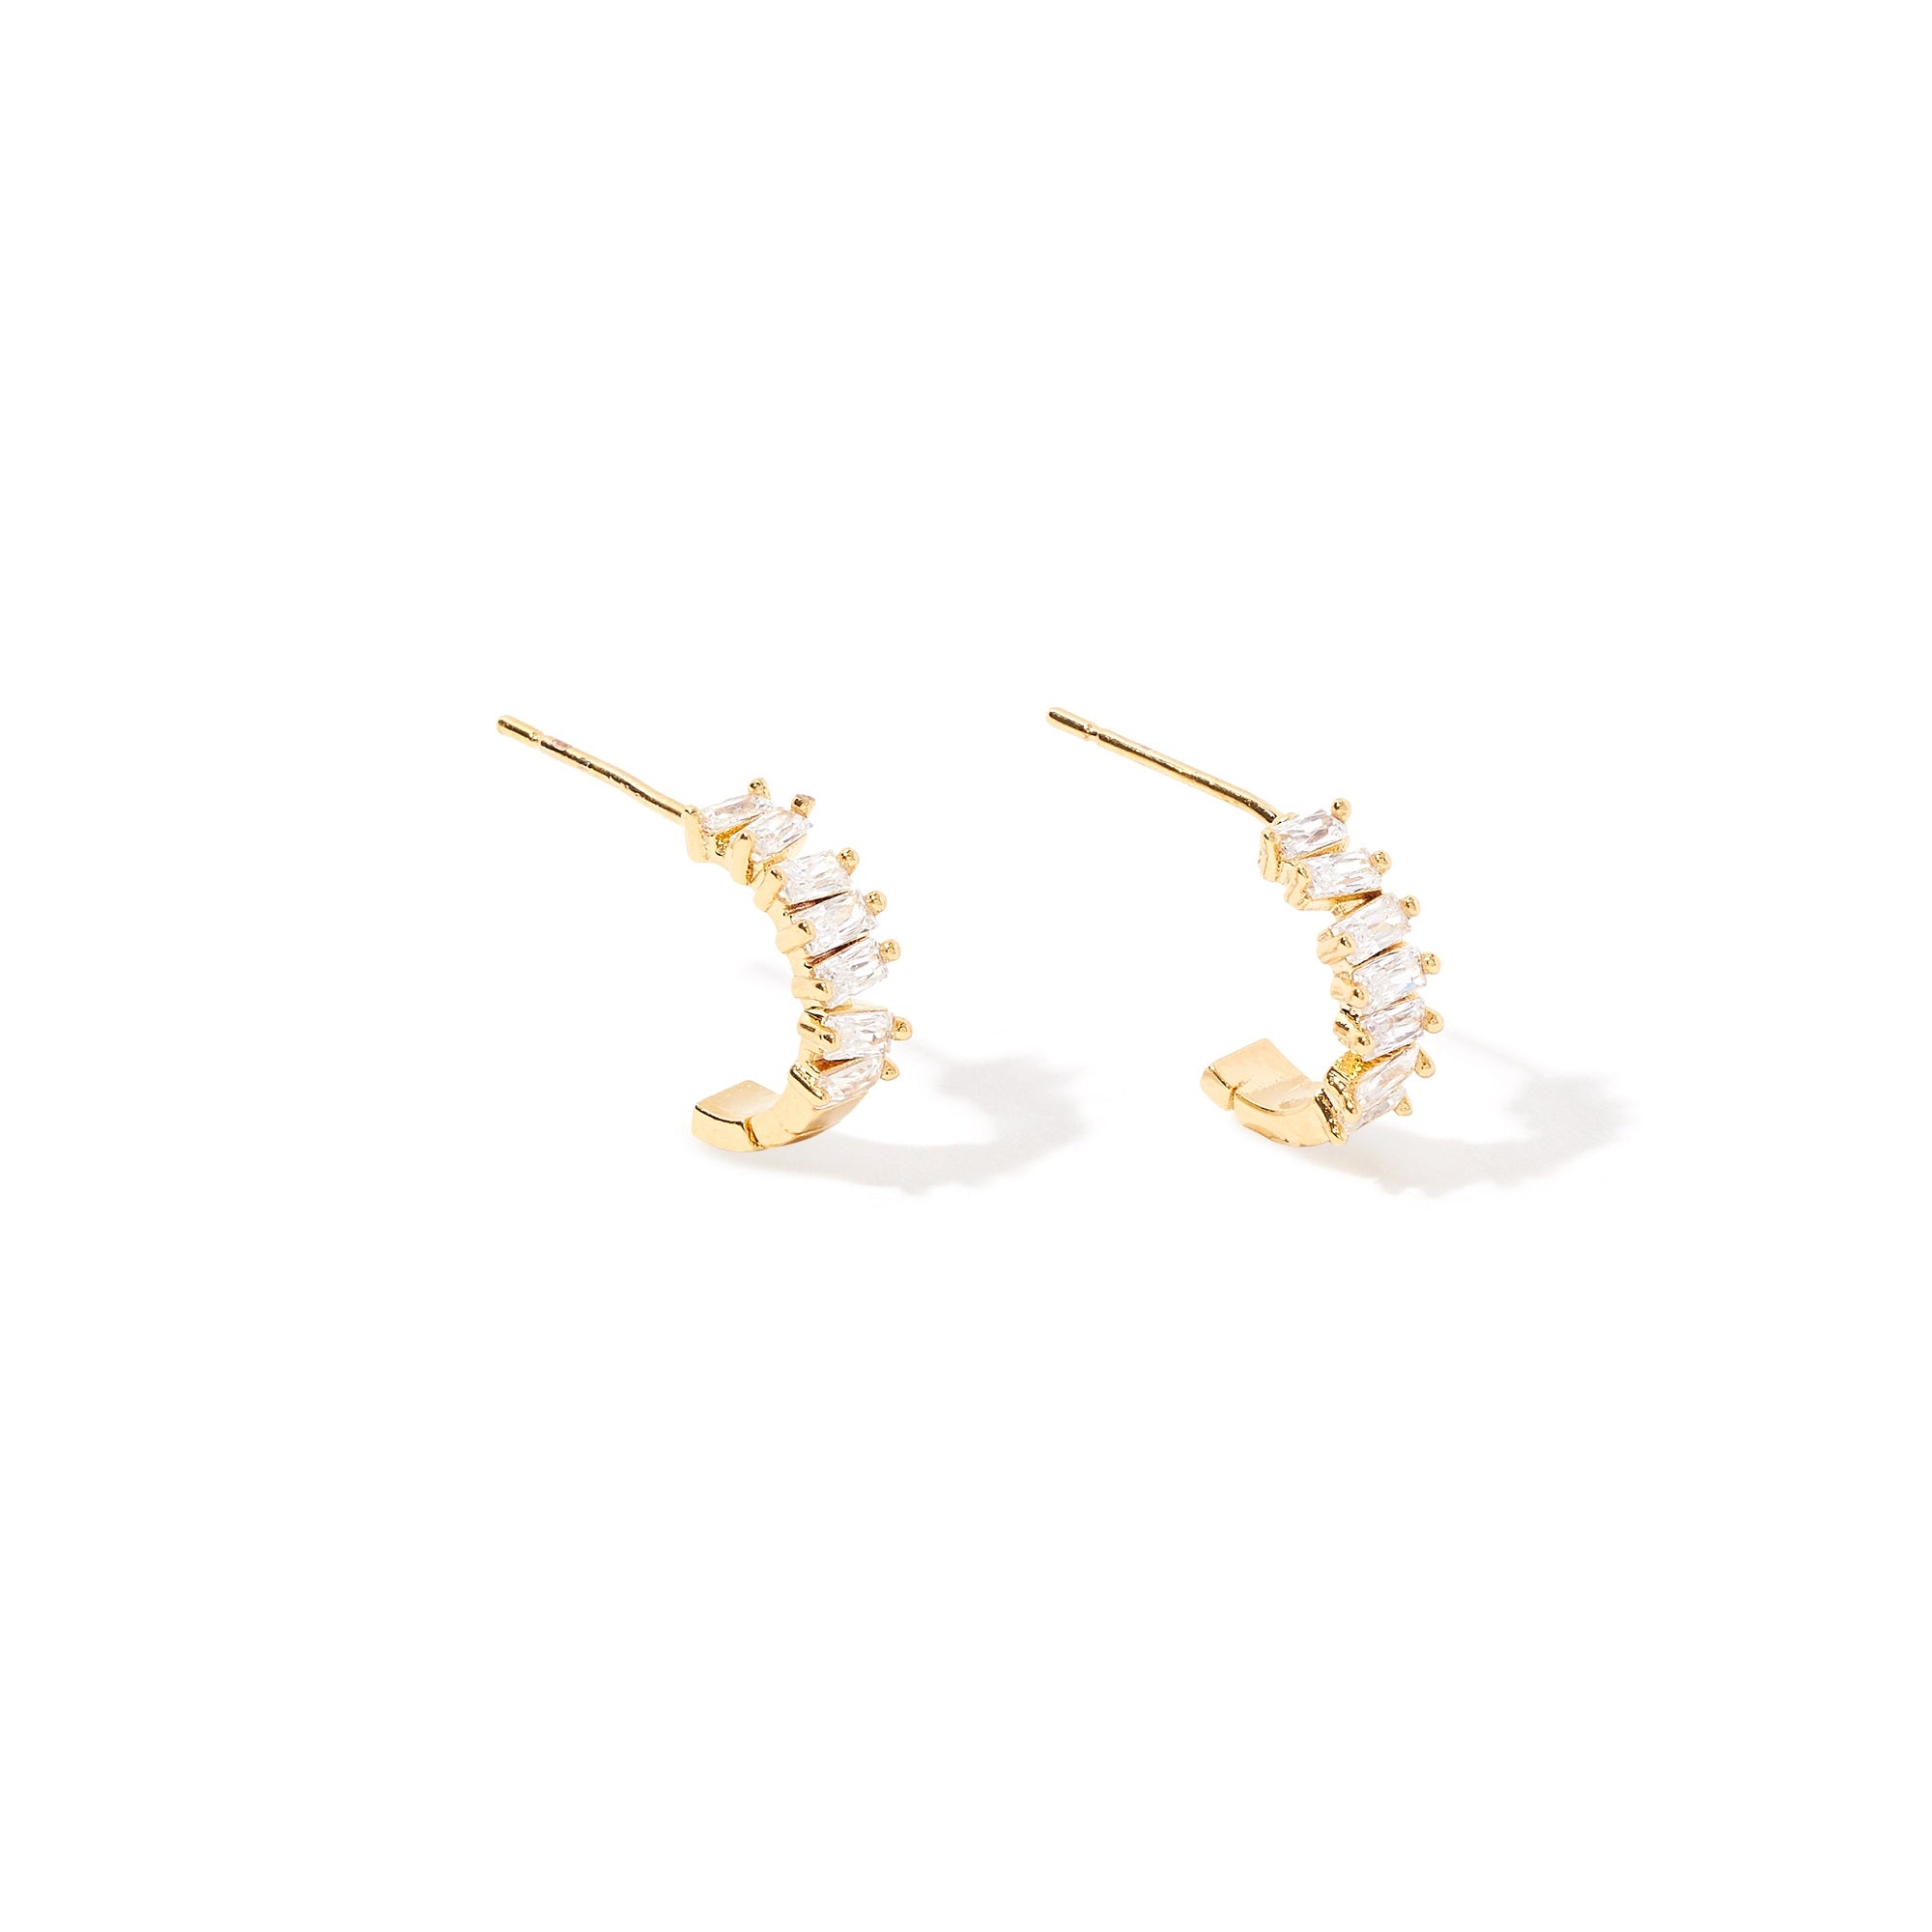 Real Gold Plated Sparkle Mini Baguette Hoop Earring For Women By Accessorize London